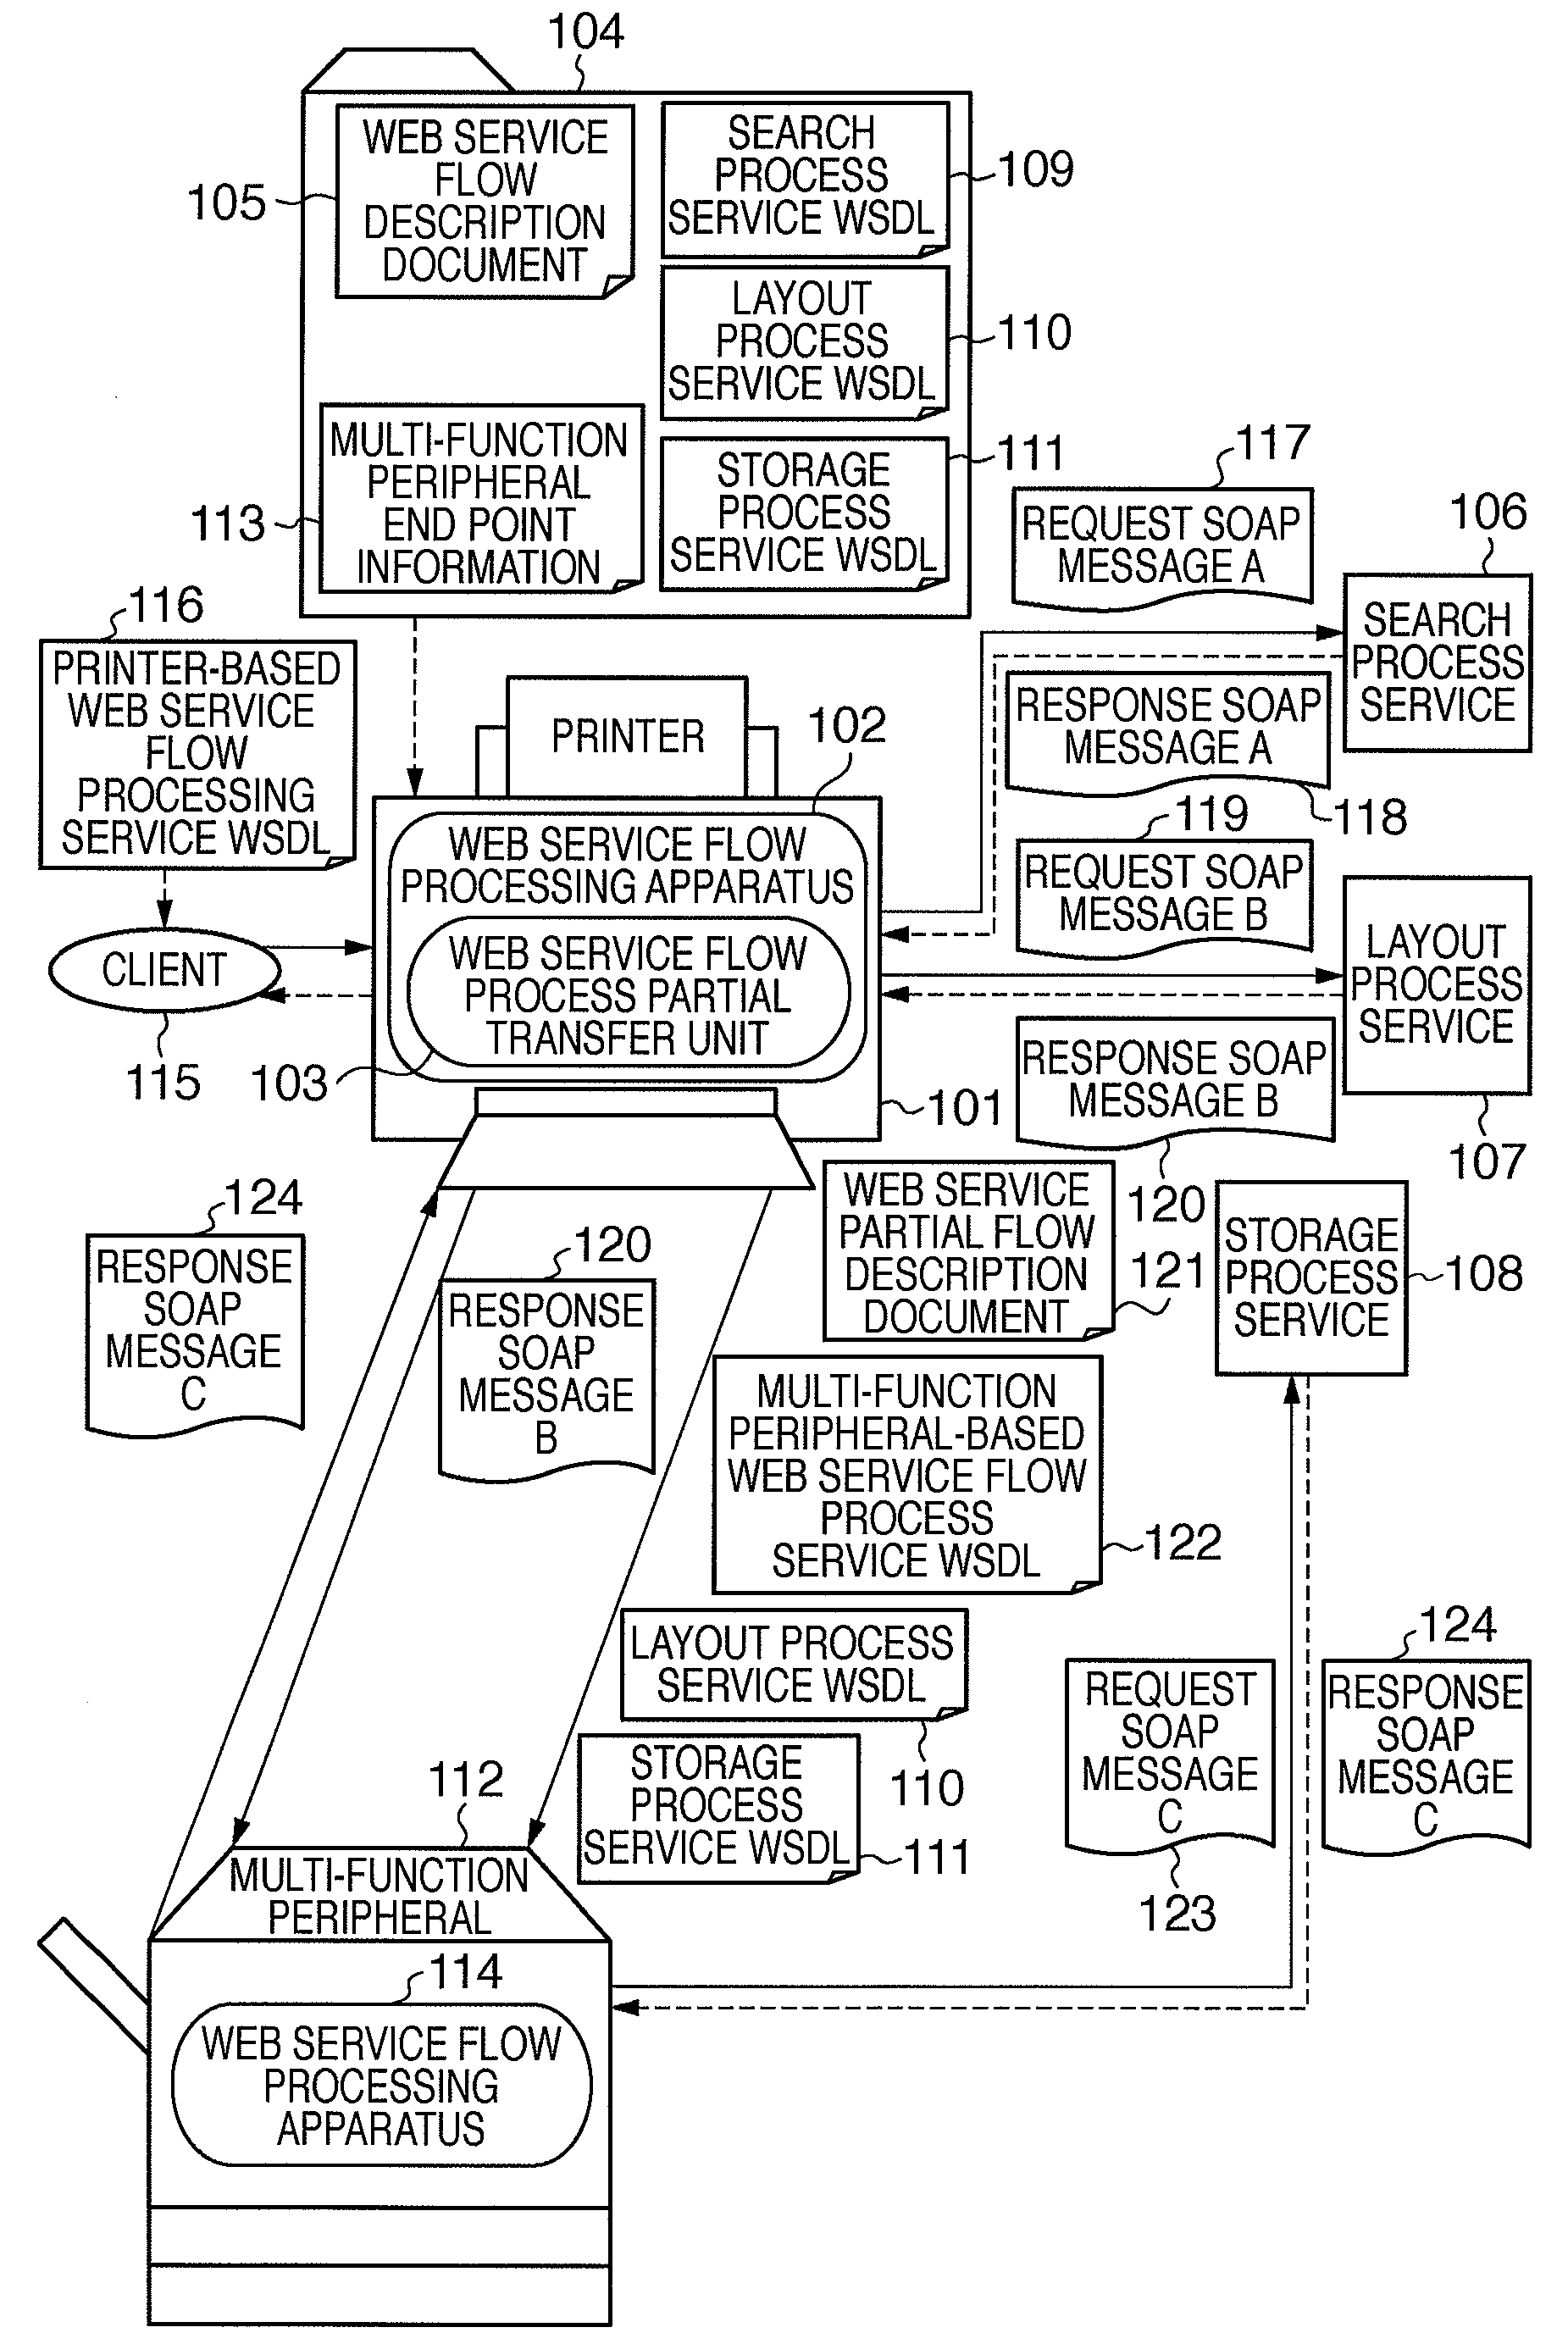 Service flow processing apparatus and method